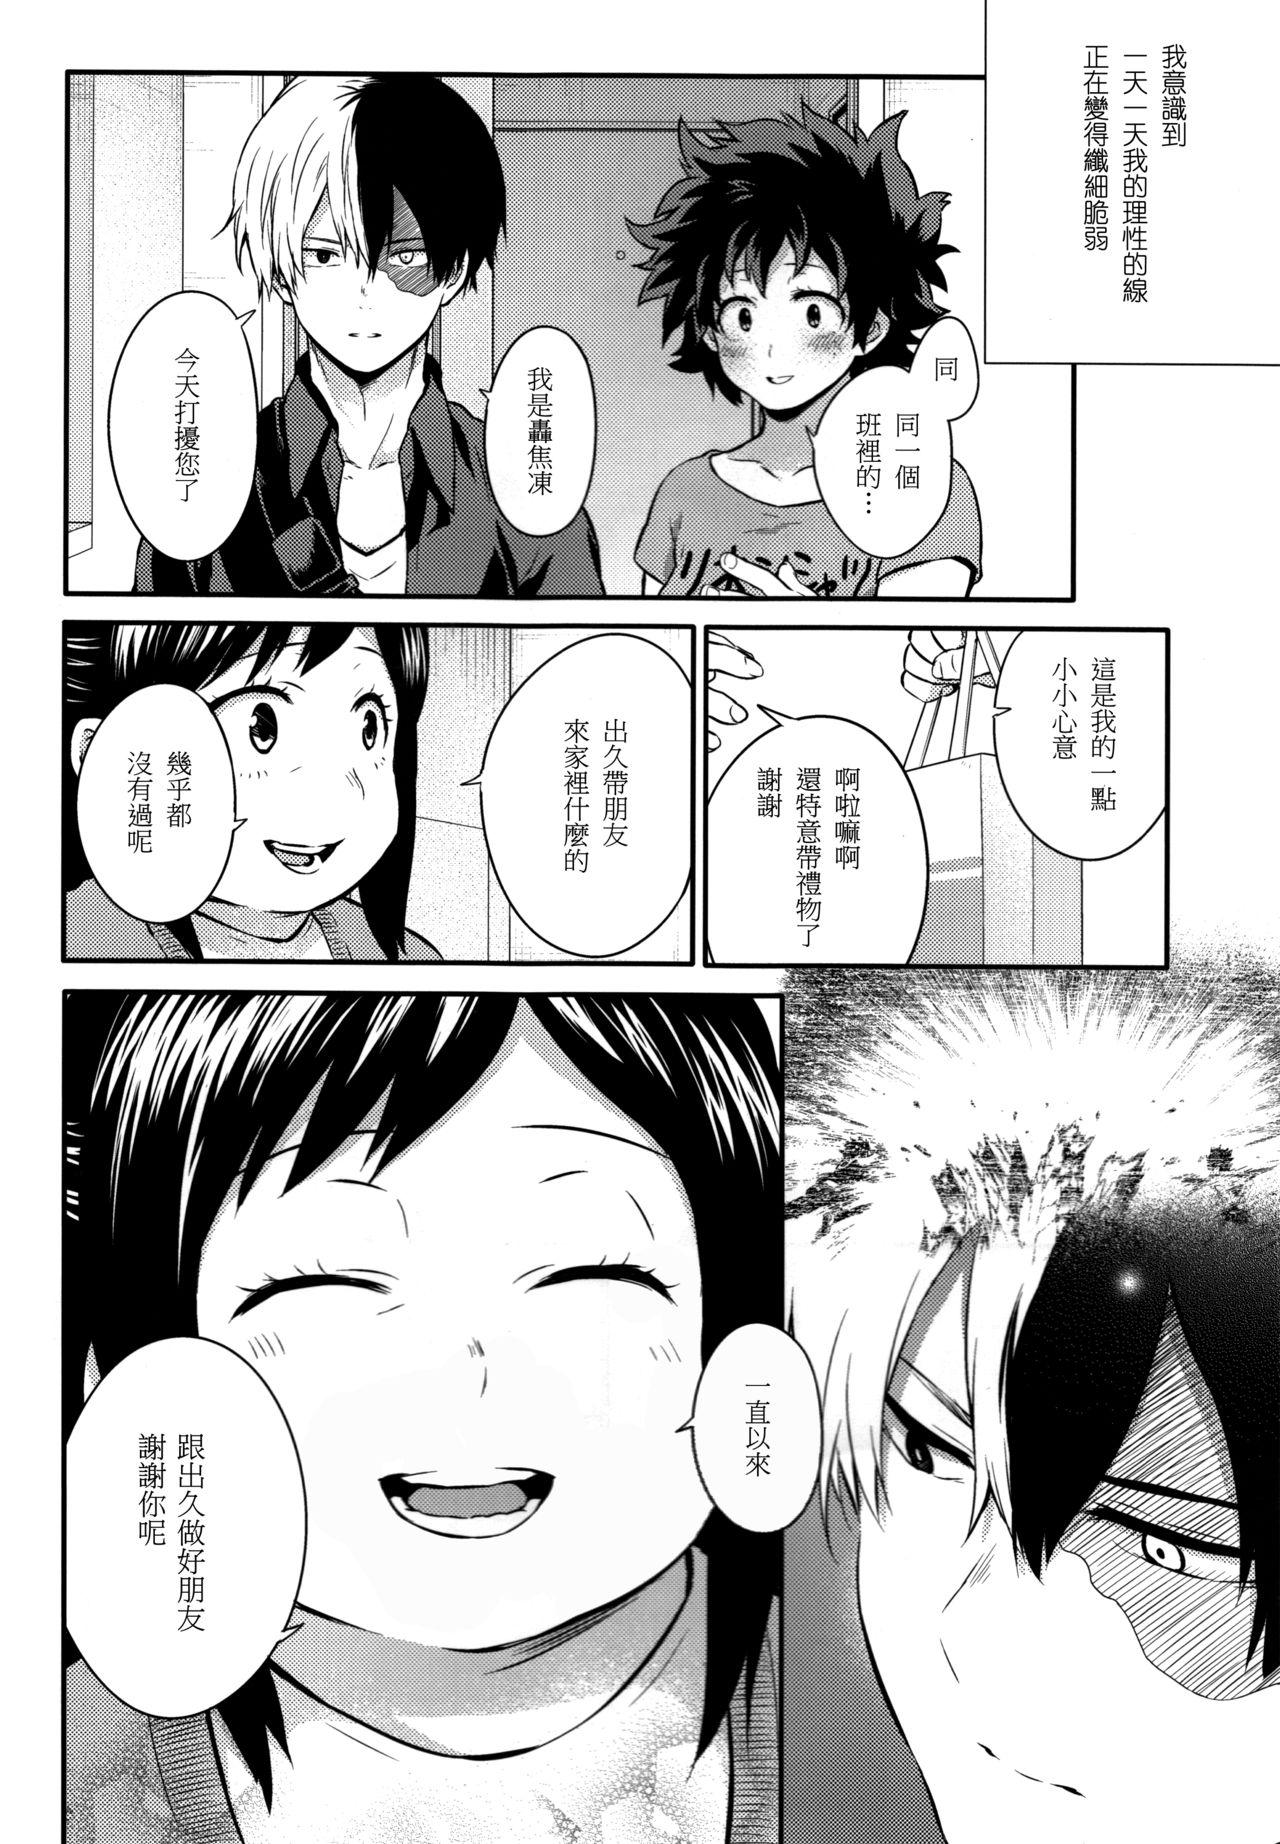 Hentai Love Me Tender 2 - My hero academia Pink Pussy - Page 11